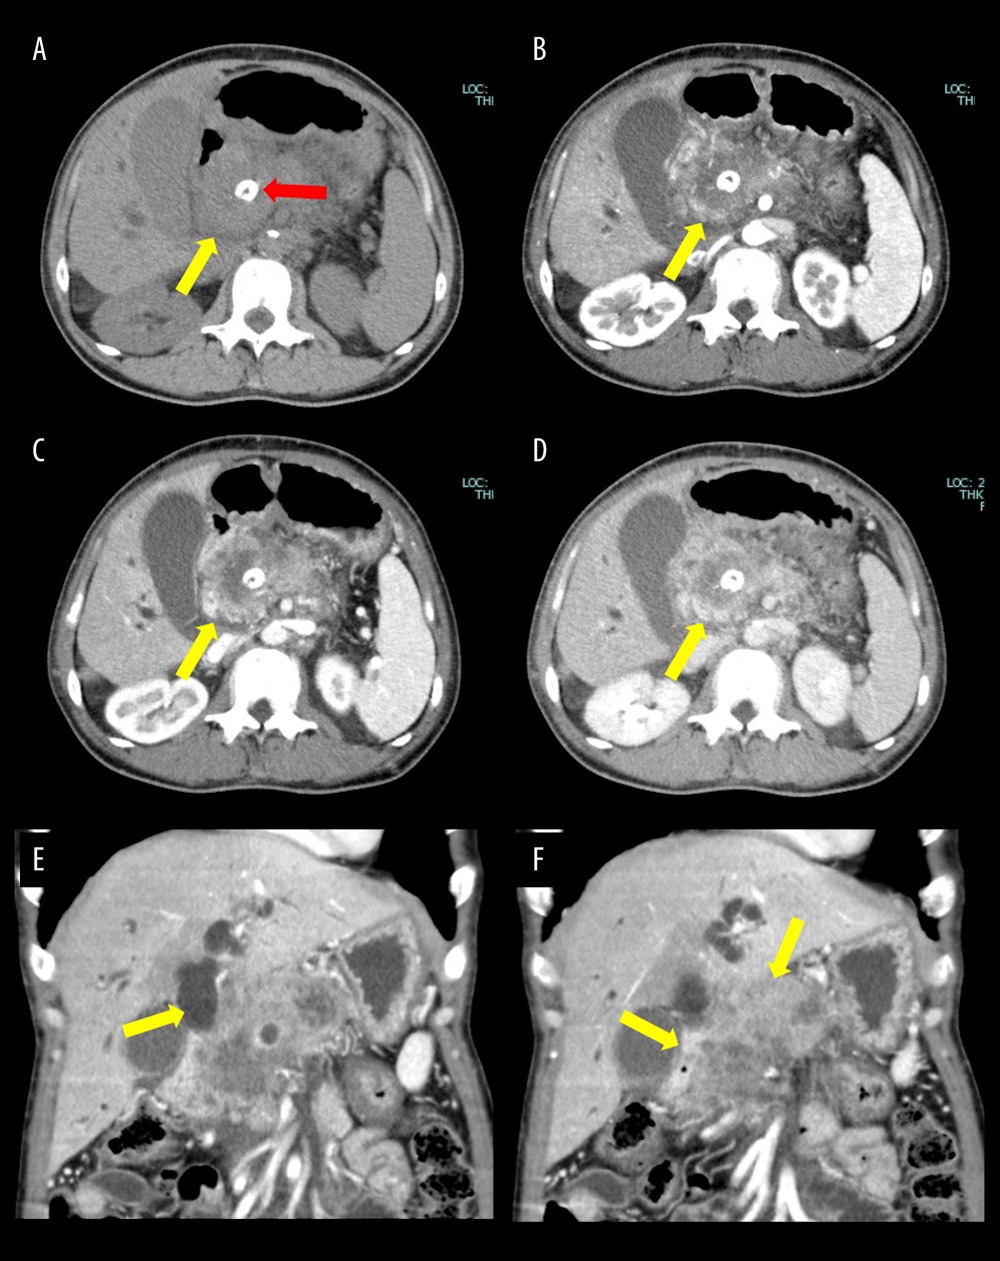 Findings of the contrast computed tomography (CT) scan of the abdomen. (A) Un-enhanced, (B) arterial, (C) portal, and (D) delayed CT scans. Gradual contrast effect was observed in areas surrounding the tumor (yellow arrow) with calcification in the inner region (red arrow). (E) The intrapancreatic bile duct in the pancreas was displaced by the tumor with dilatation of the intrahepatic bile duct (yellow arrow). (F) The boundary between the stomach and duodenum was unclear, and tumor invasion was suspected (yellow arrow).